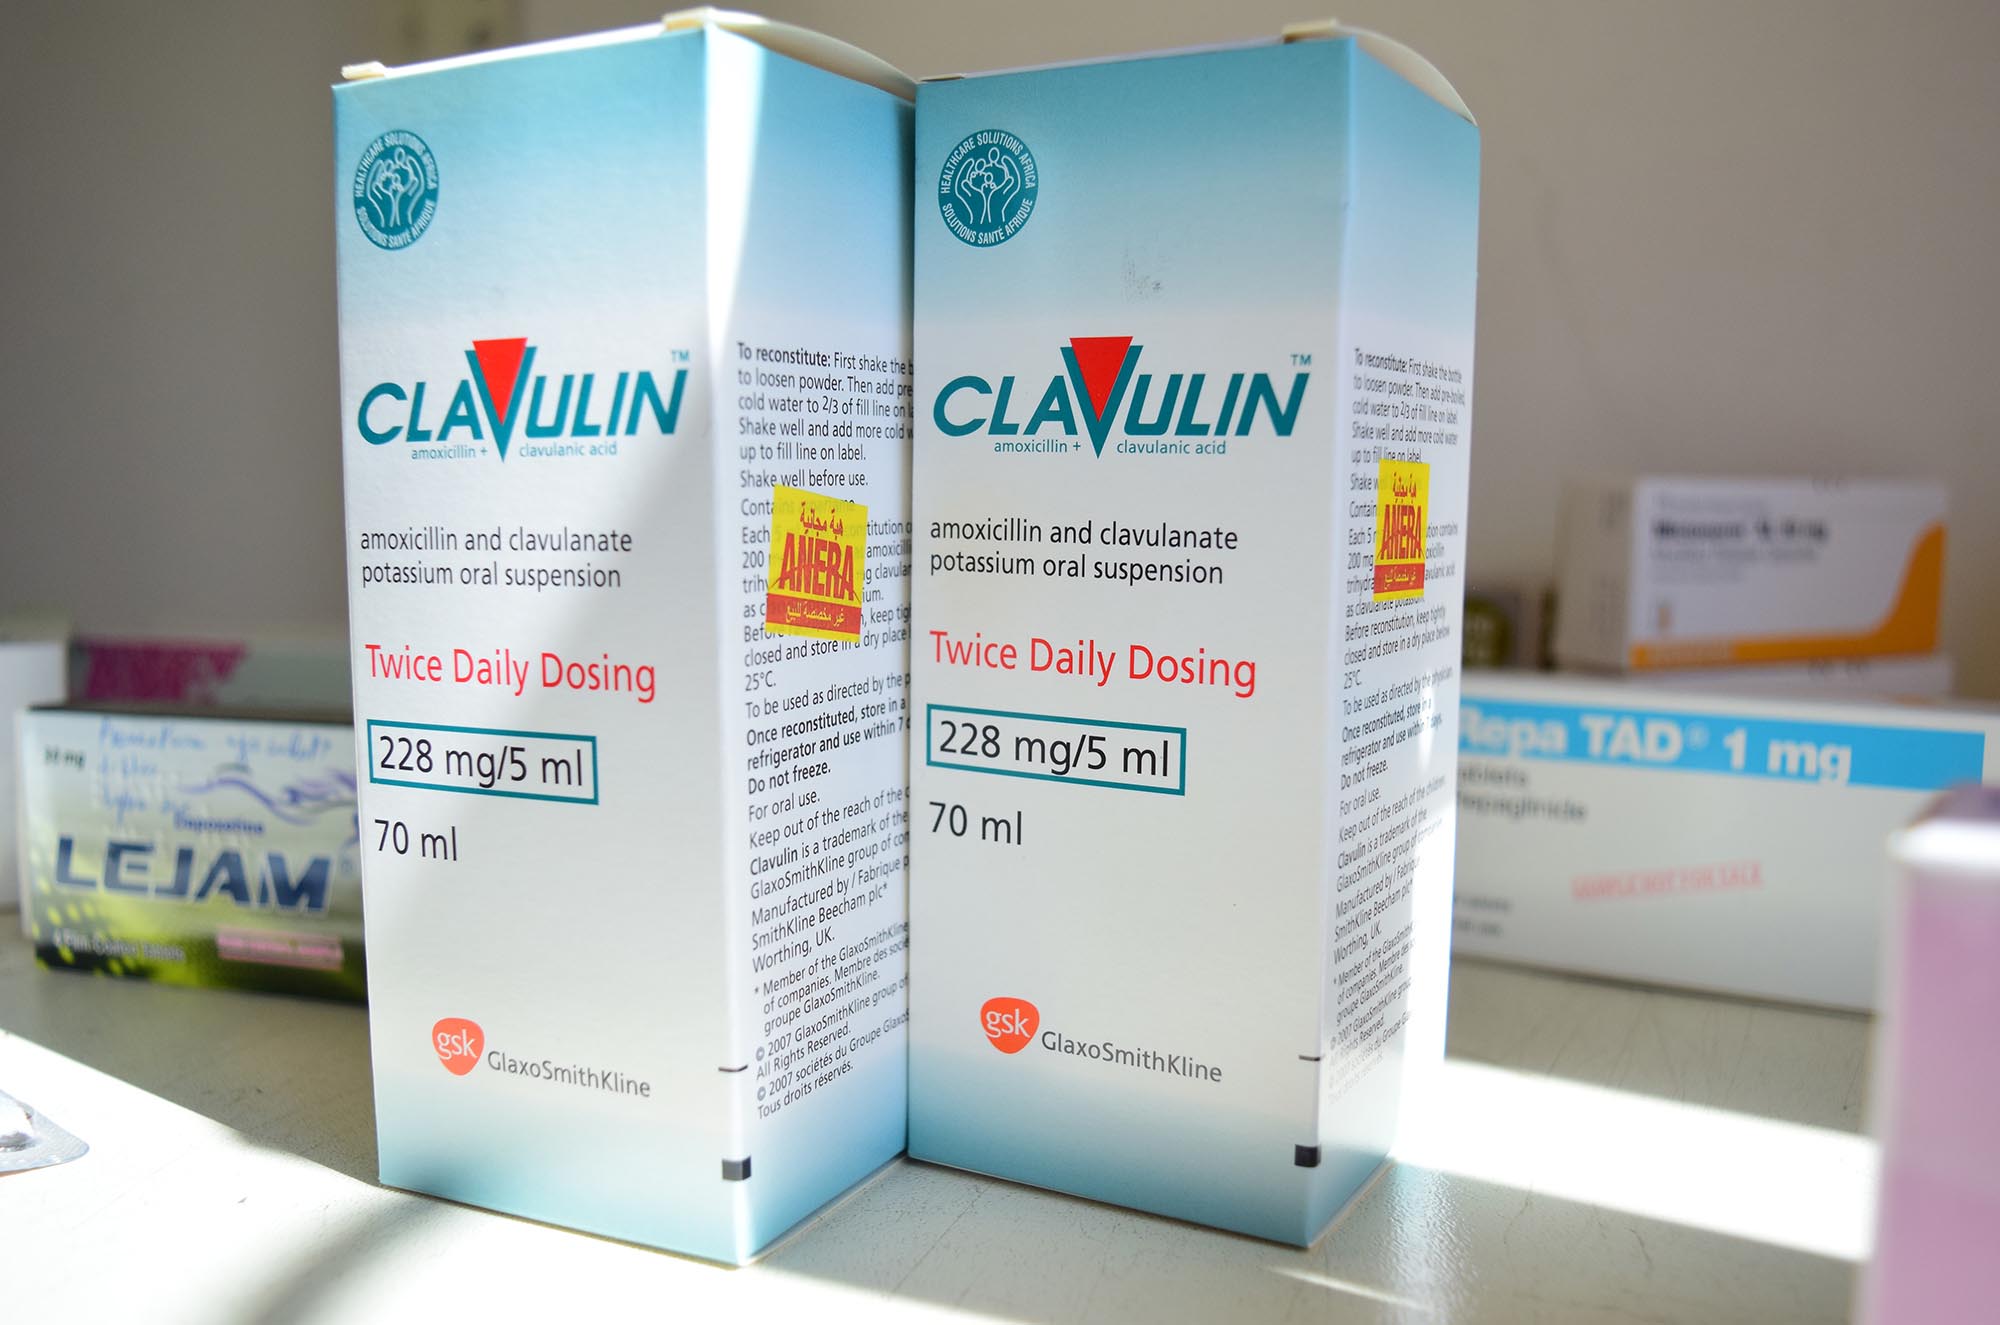 Clavulin, an anti-inflammatory medicine used in cases of sinusitis, ear infection, bronchitis and others